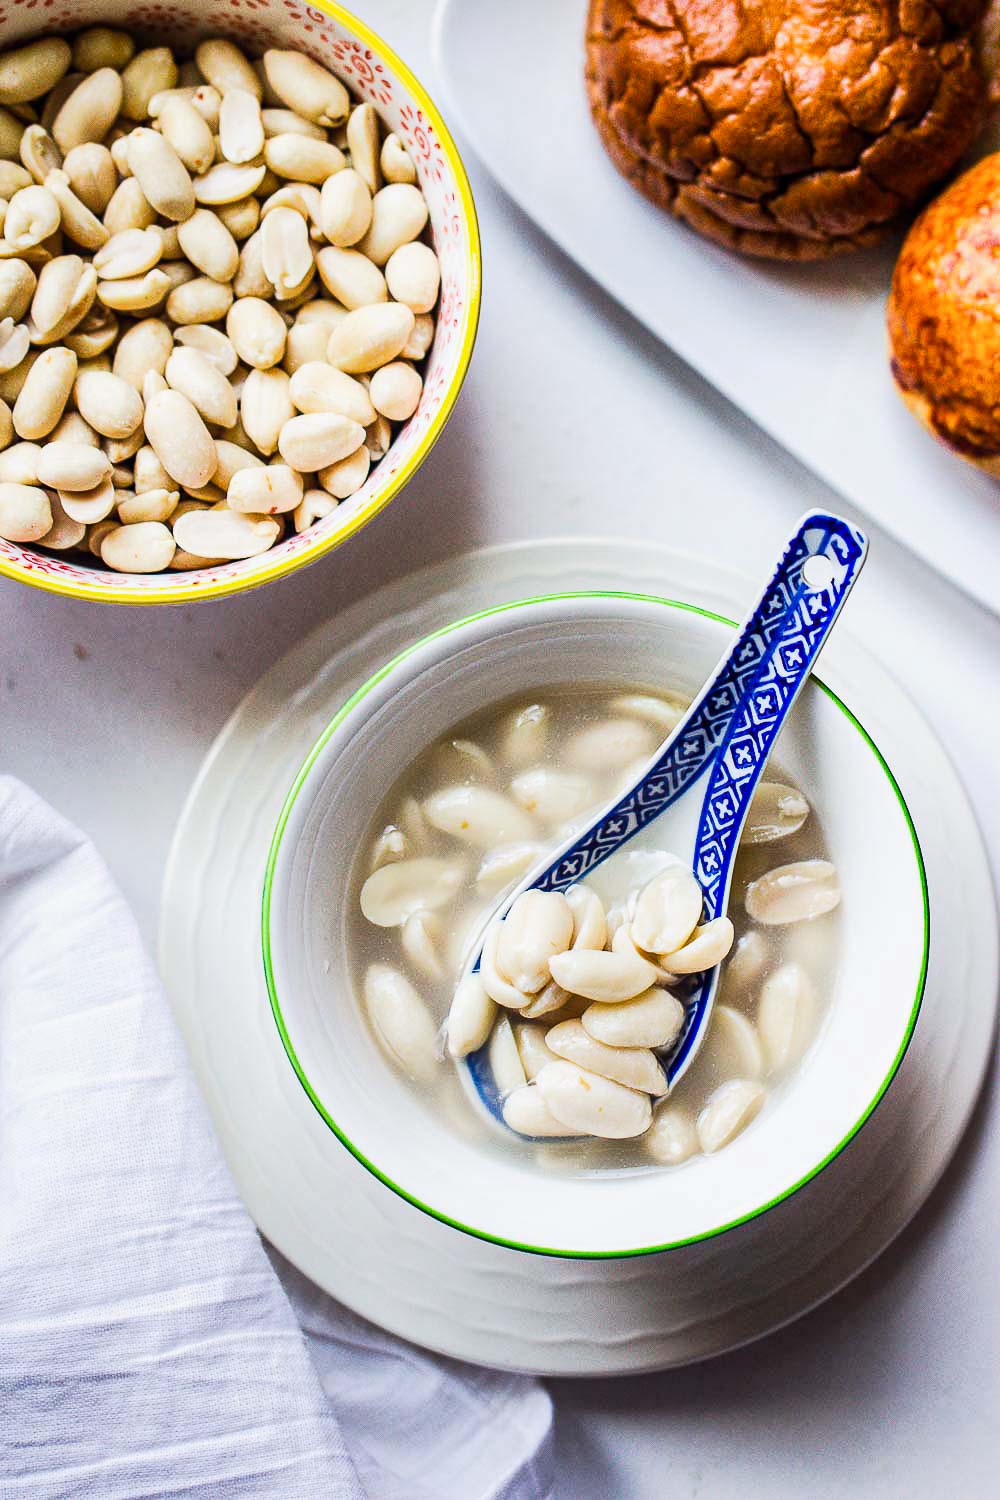 Taiwanese sweet peanut soup or wedang kacang is a sweet, creamy, and comforting dessert made with three ingredients. It's so easy, and you can make this on a stove, slow cooker, or Instant Pot. This sweet peanut soup makes a good dessert for a big group or special celebration.